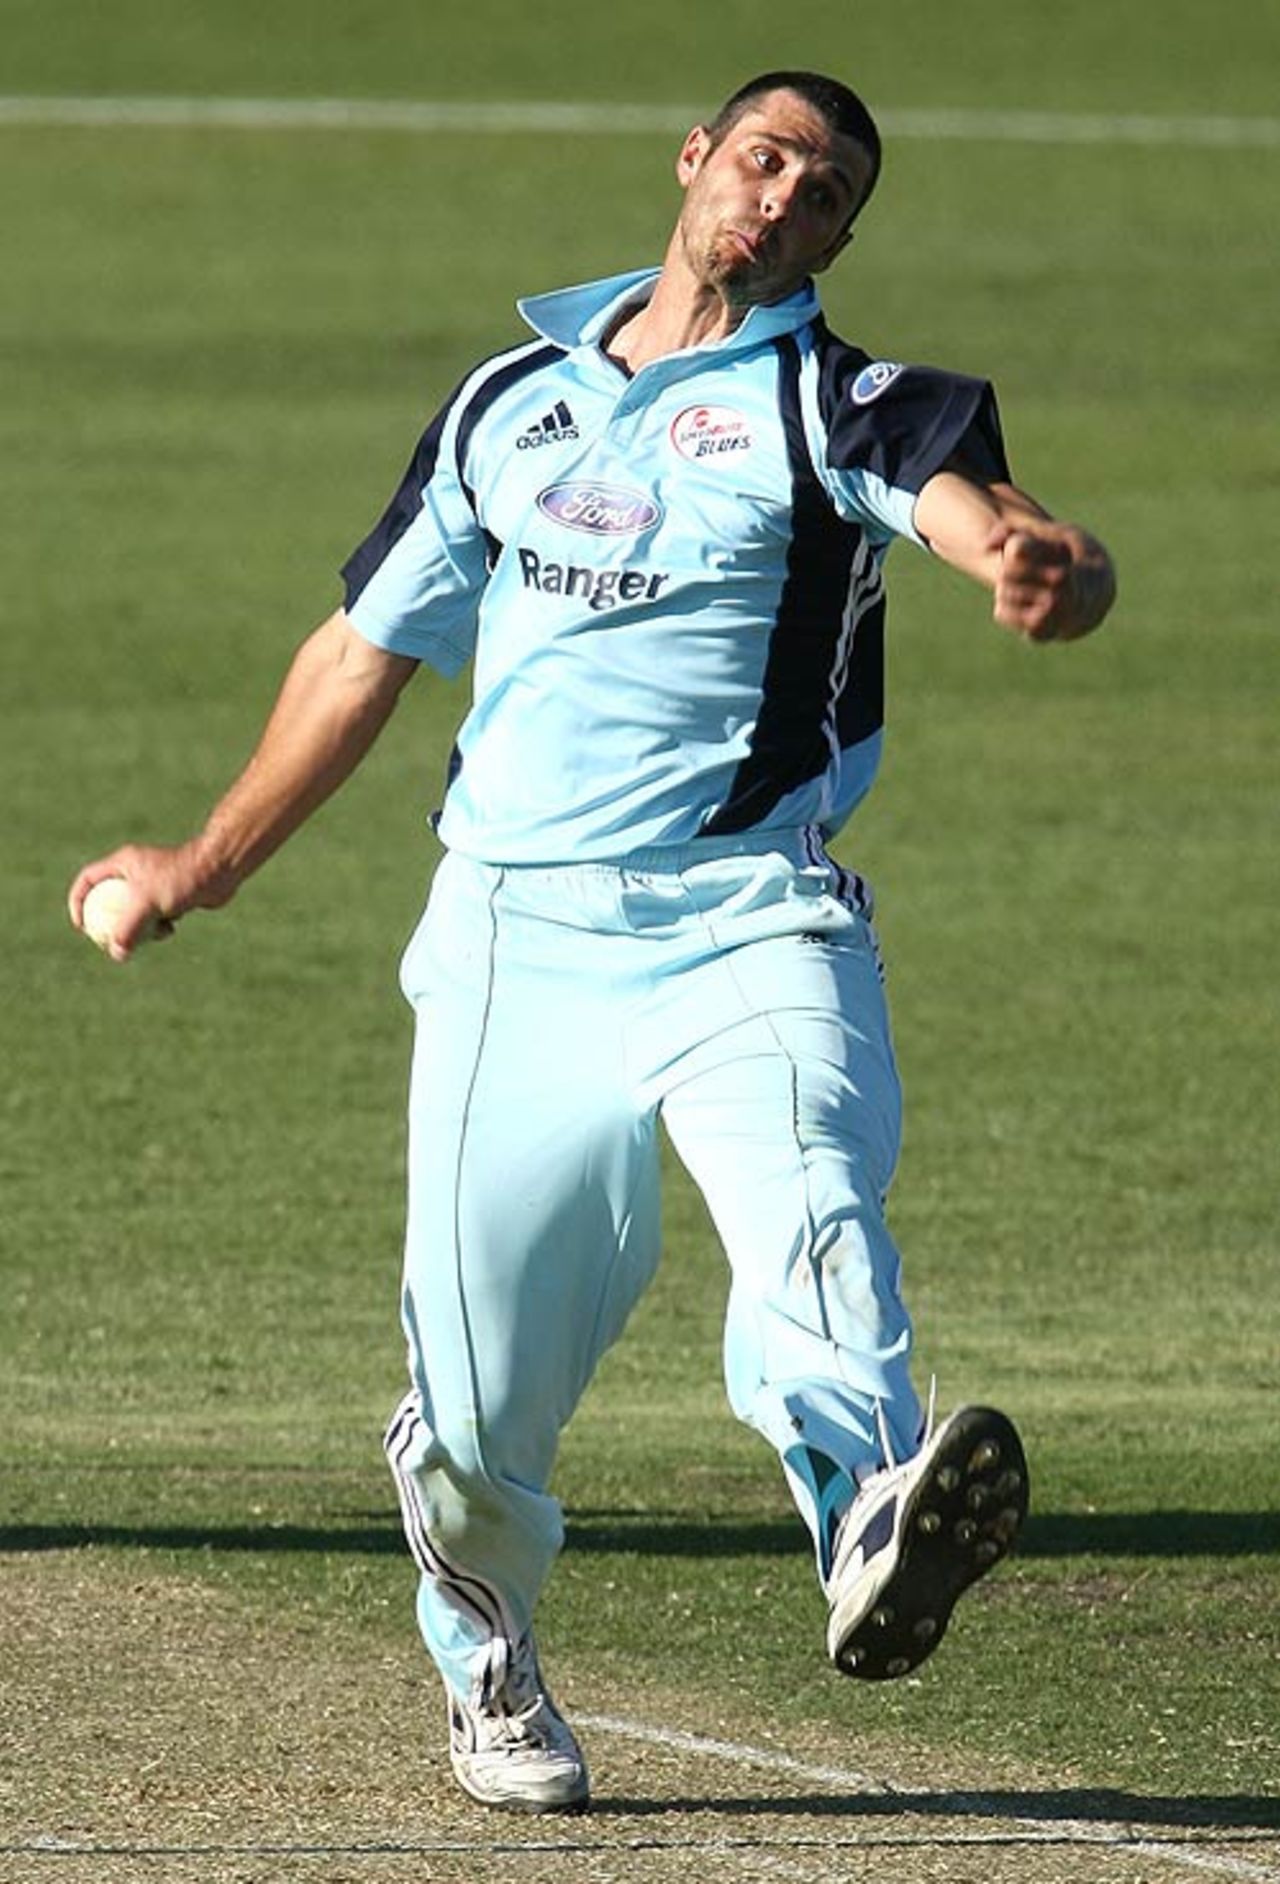 Mark Cameron claimed 2 for 55 on debut, Western Australia v New South Wales, FR Cup, Perth, October 12, 2007